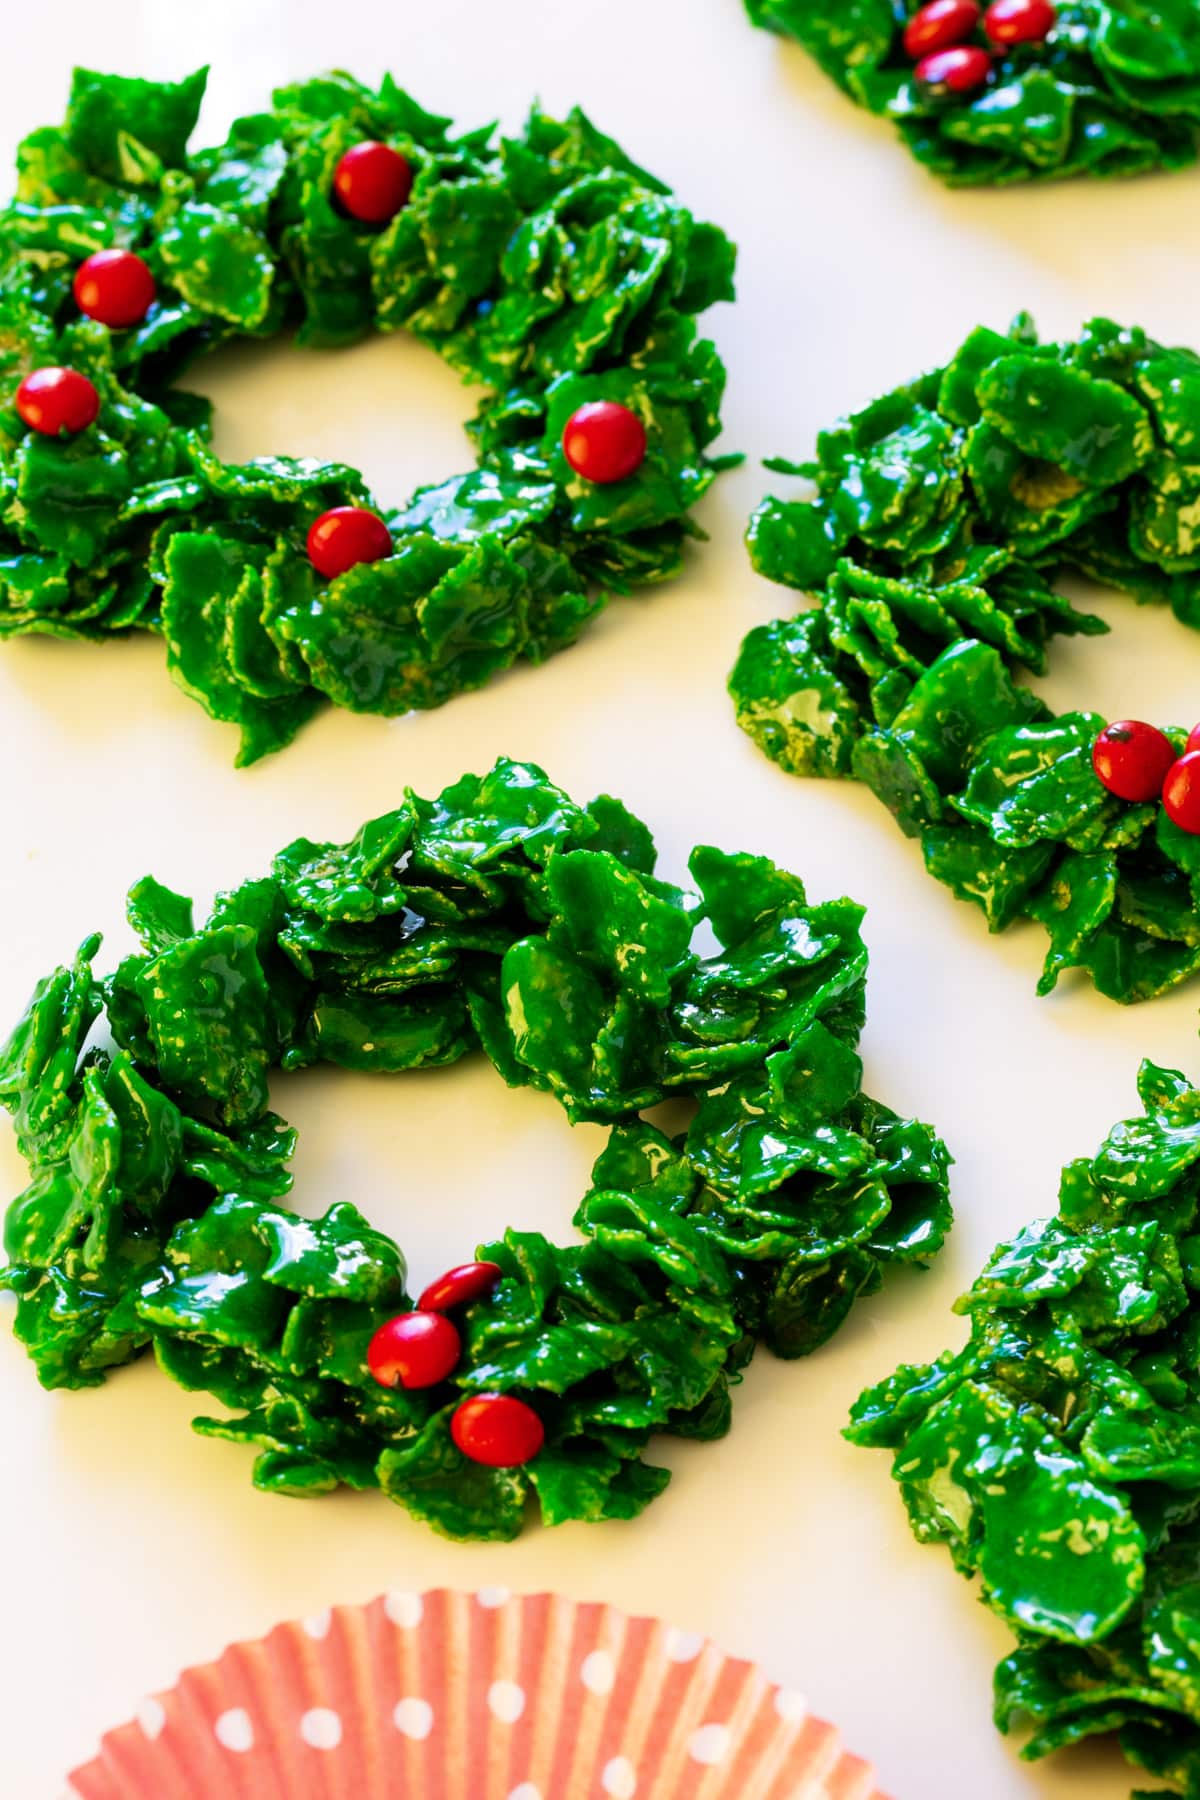 Cornflake Christmas Wreaths spread out on white background.